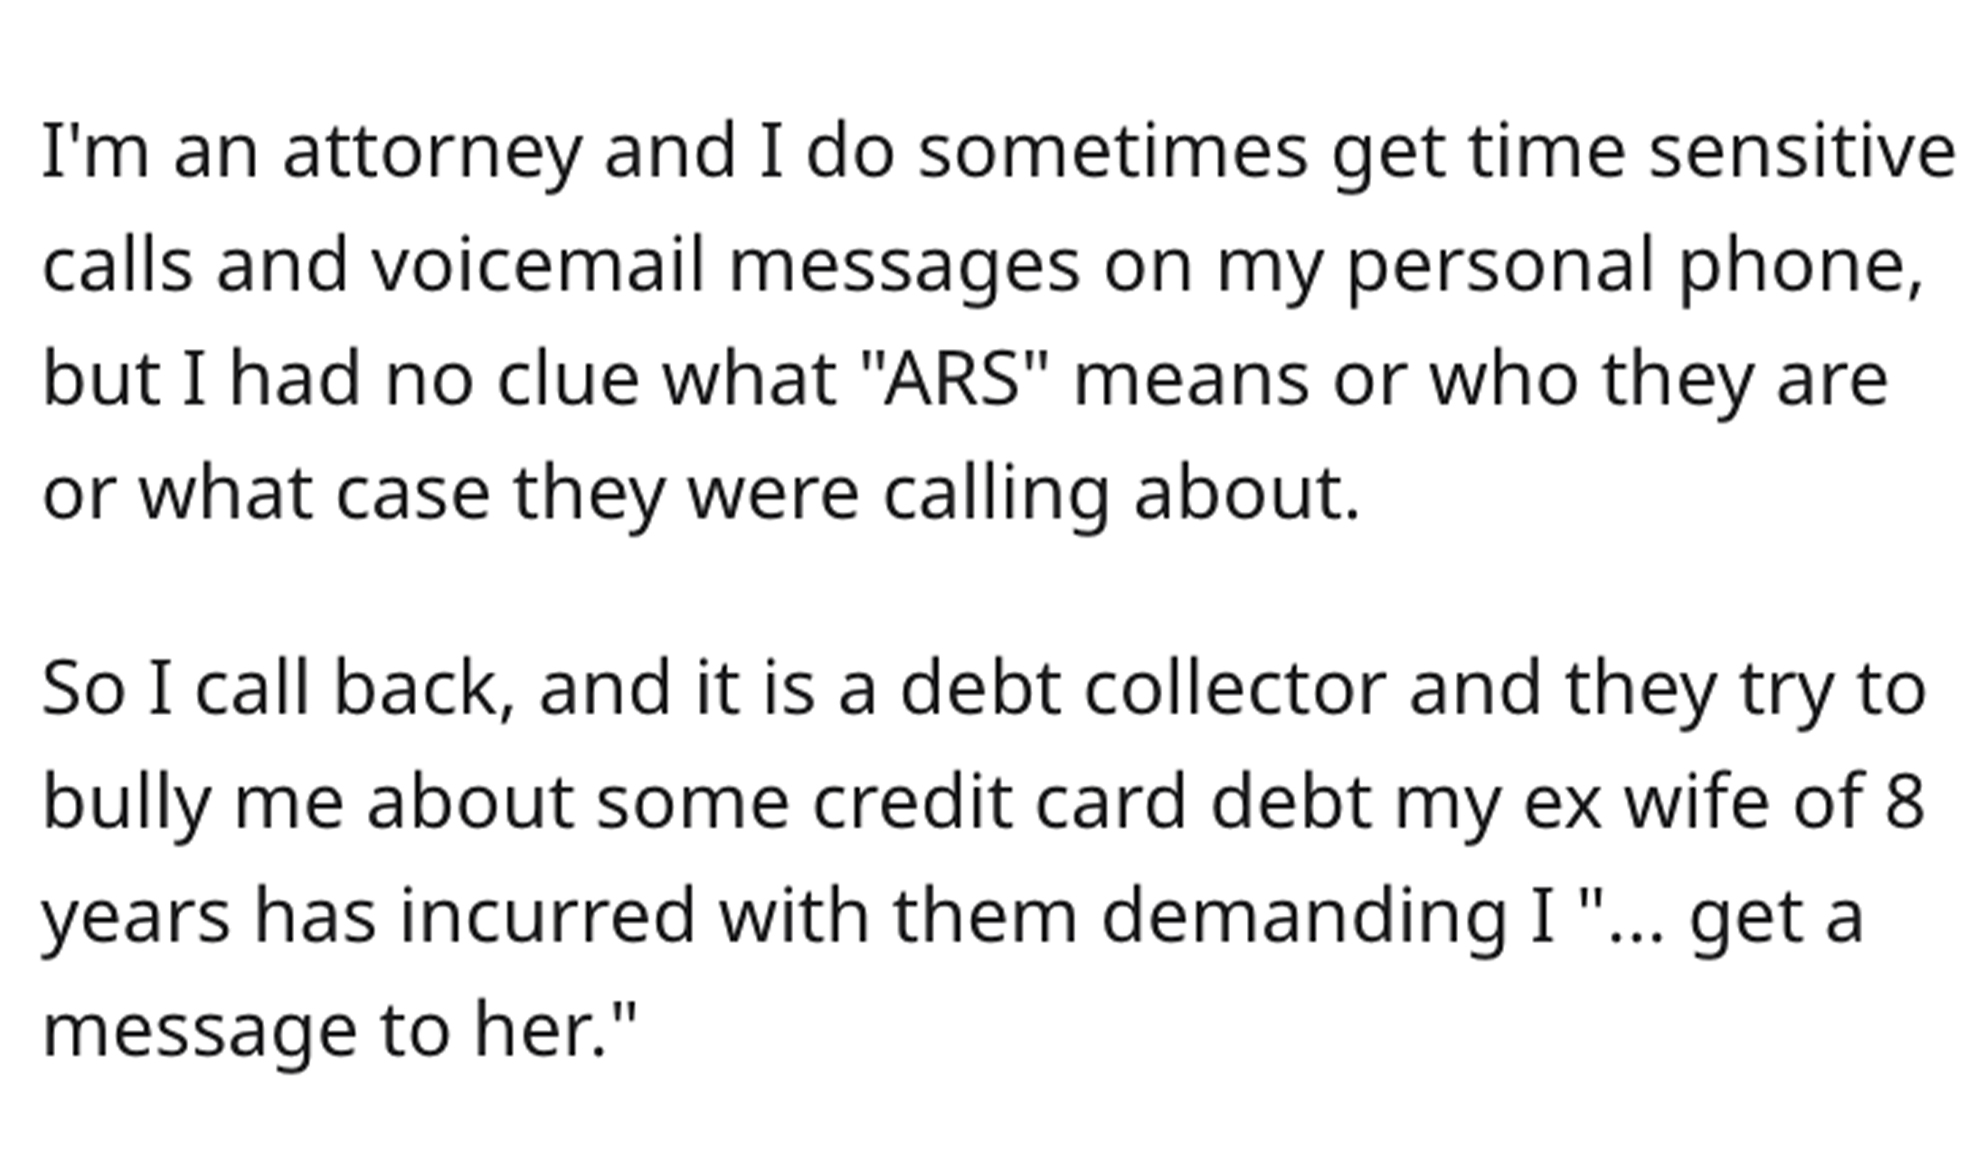 Debt Collector Revenge Story - angle - I'm an attorney and I do sometimes get time sensitive calls and voicemail messages on my personal phone, but I had no clue what "Ars" means or who they are or what case they were calling about. So I call back, and it